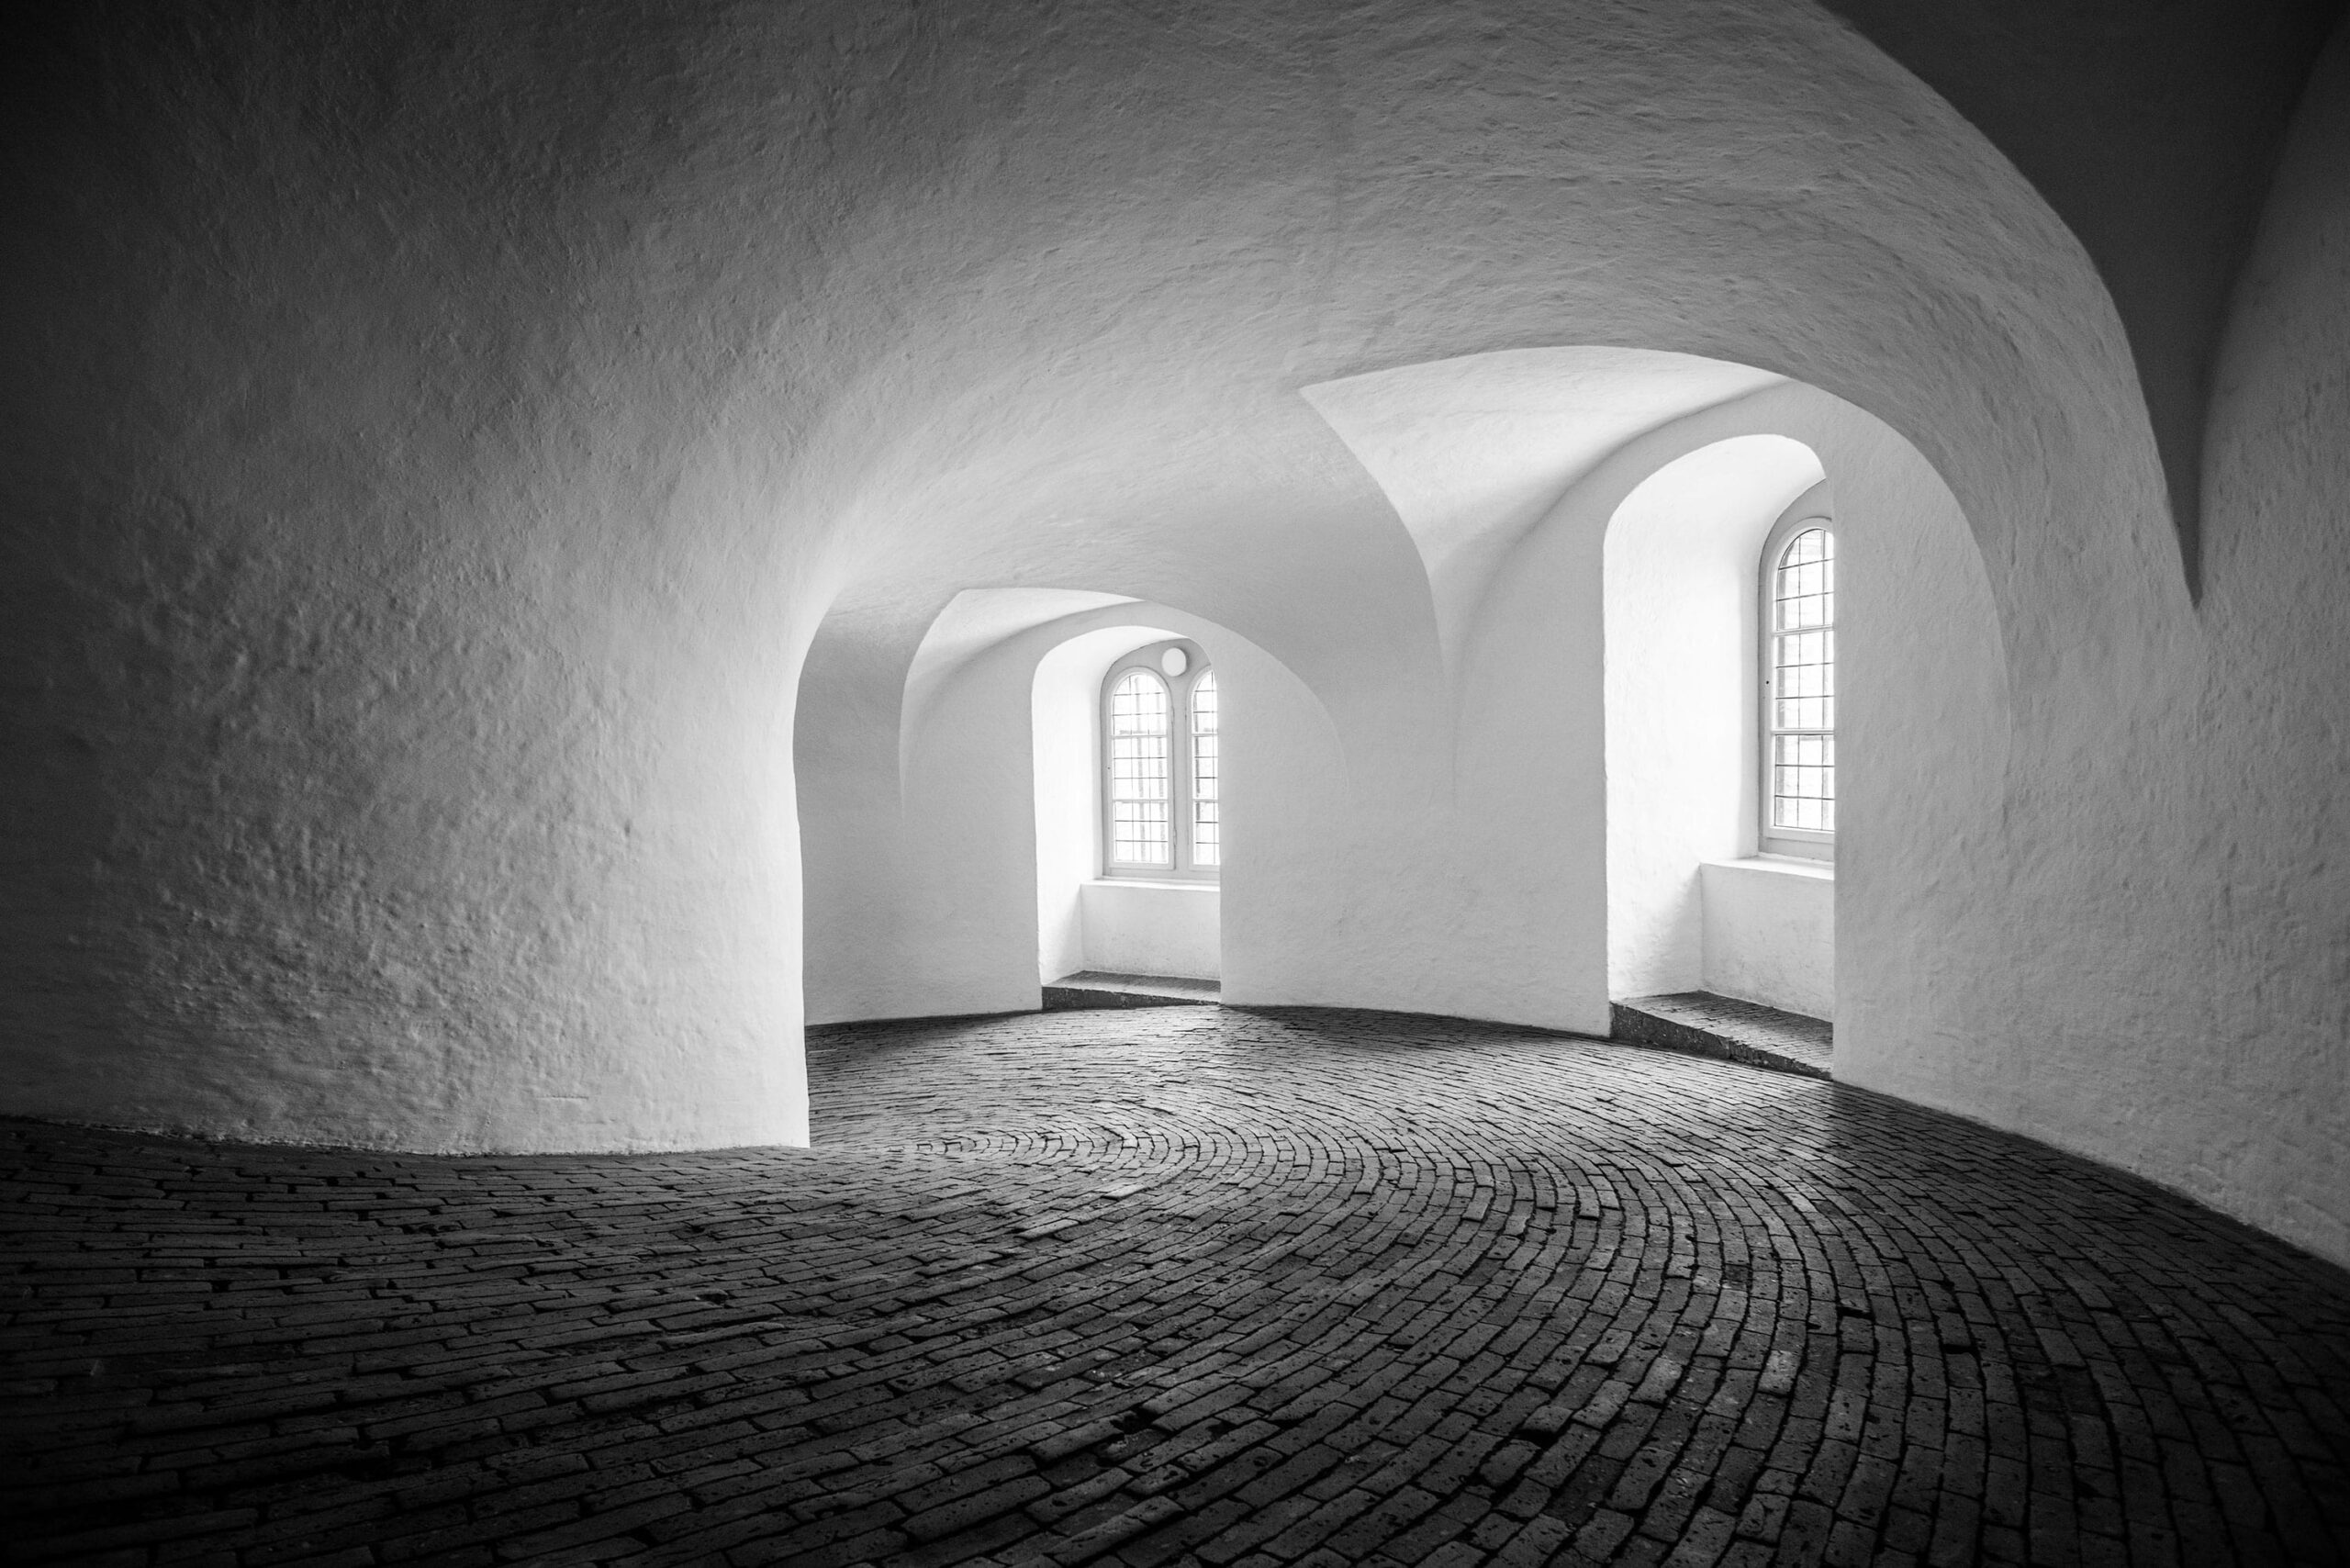 Monochrome image showcasing the interior of Rundetaarn in Copenhagen, Denmark. The winding path leading upwards is captured in minimalist black and white, emphasizing the architectural elegance of the historic tower. Photographed by travel photographer Jennifer Esseiva using her Nikon D810, this image epitomizes the beauty of simplicity and evokes a sense of timeless charm.